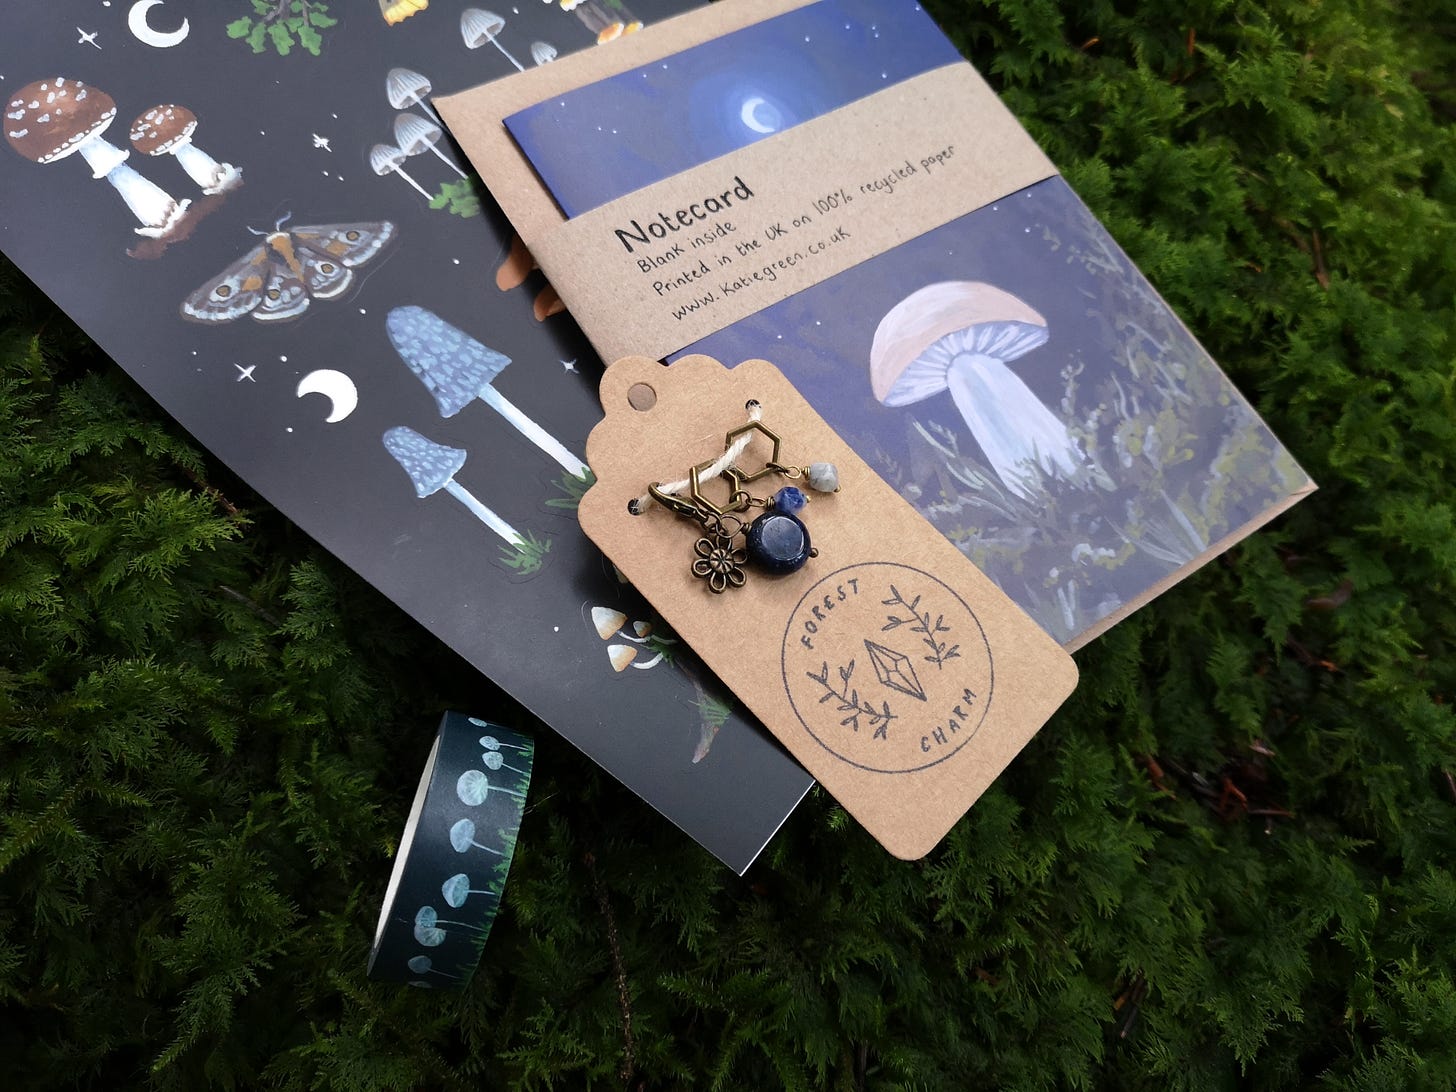 Image description: A close up photo of a gift bundle sitting on top of some squishy moss. On top is a beautiful card of handmade stitch markers made with blue sodalite beads and metal charms. Beneath these are a notecard printed with a mushroom illustration, some mushroom stickers and a roll of mushroom washi tape.